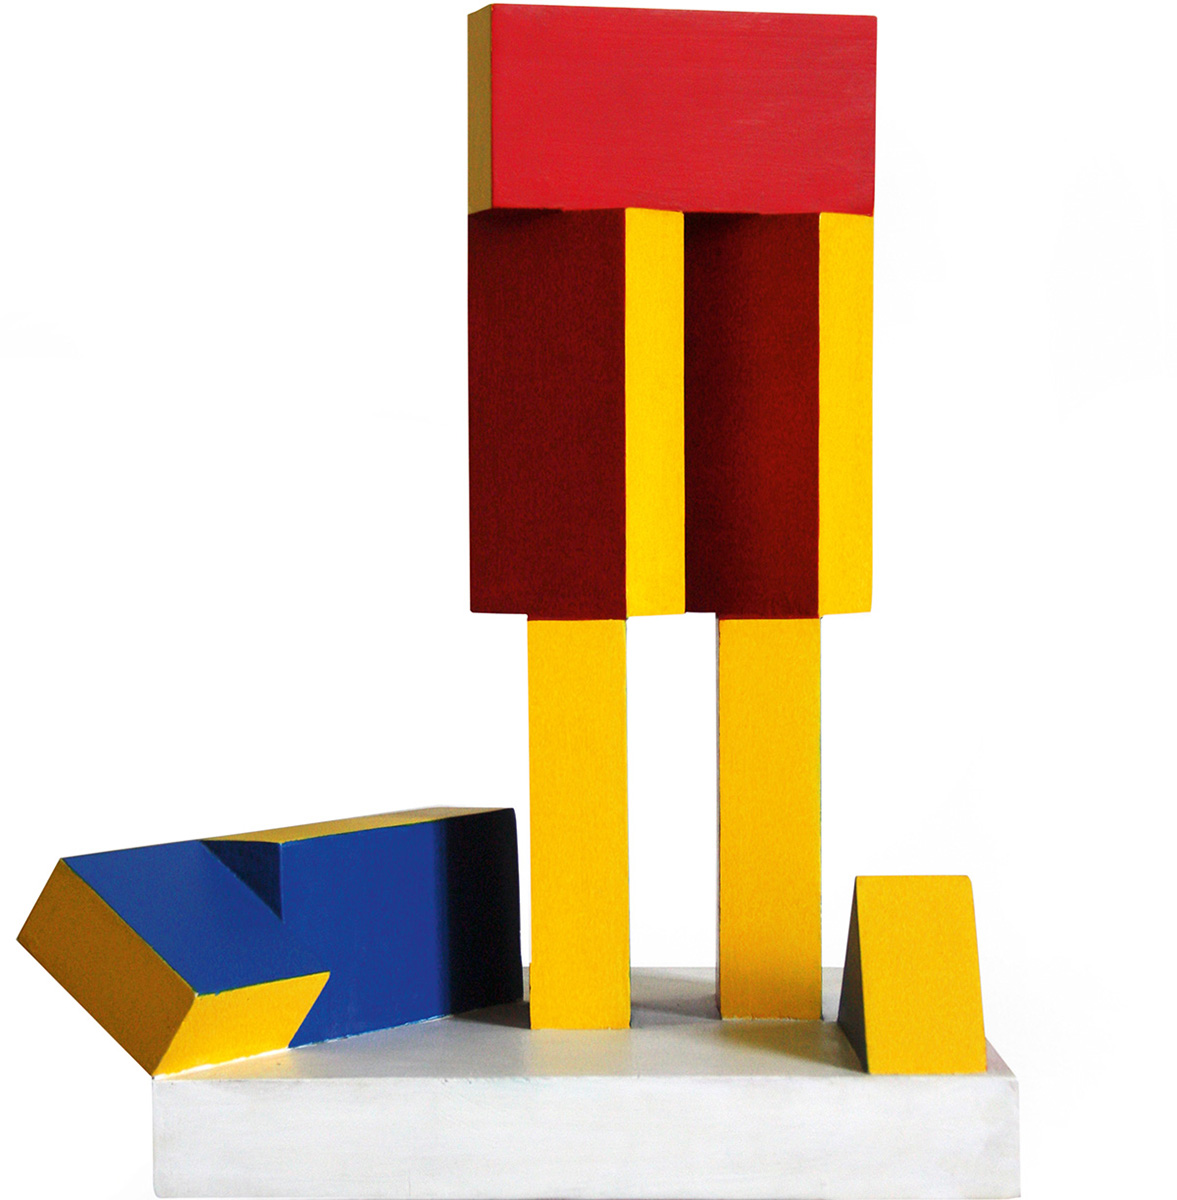 Säulenformation, 198455,5 x 47 x 41,5Wood, lacquered